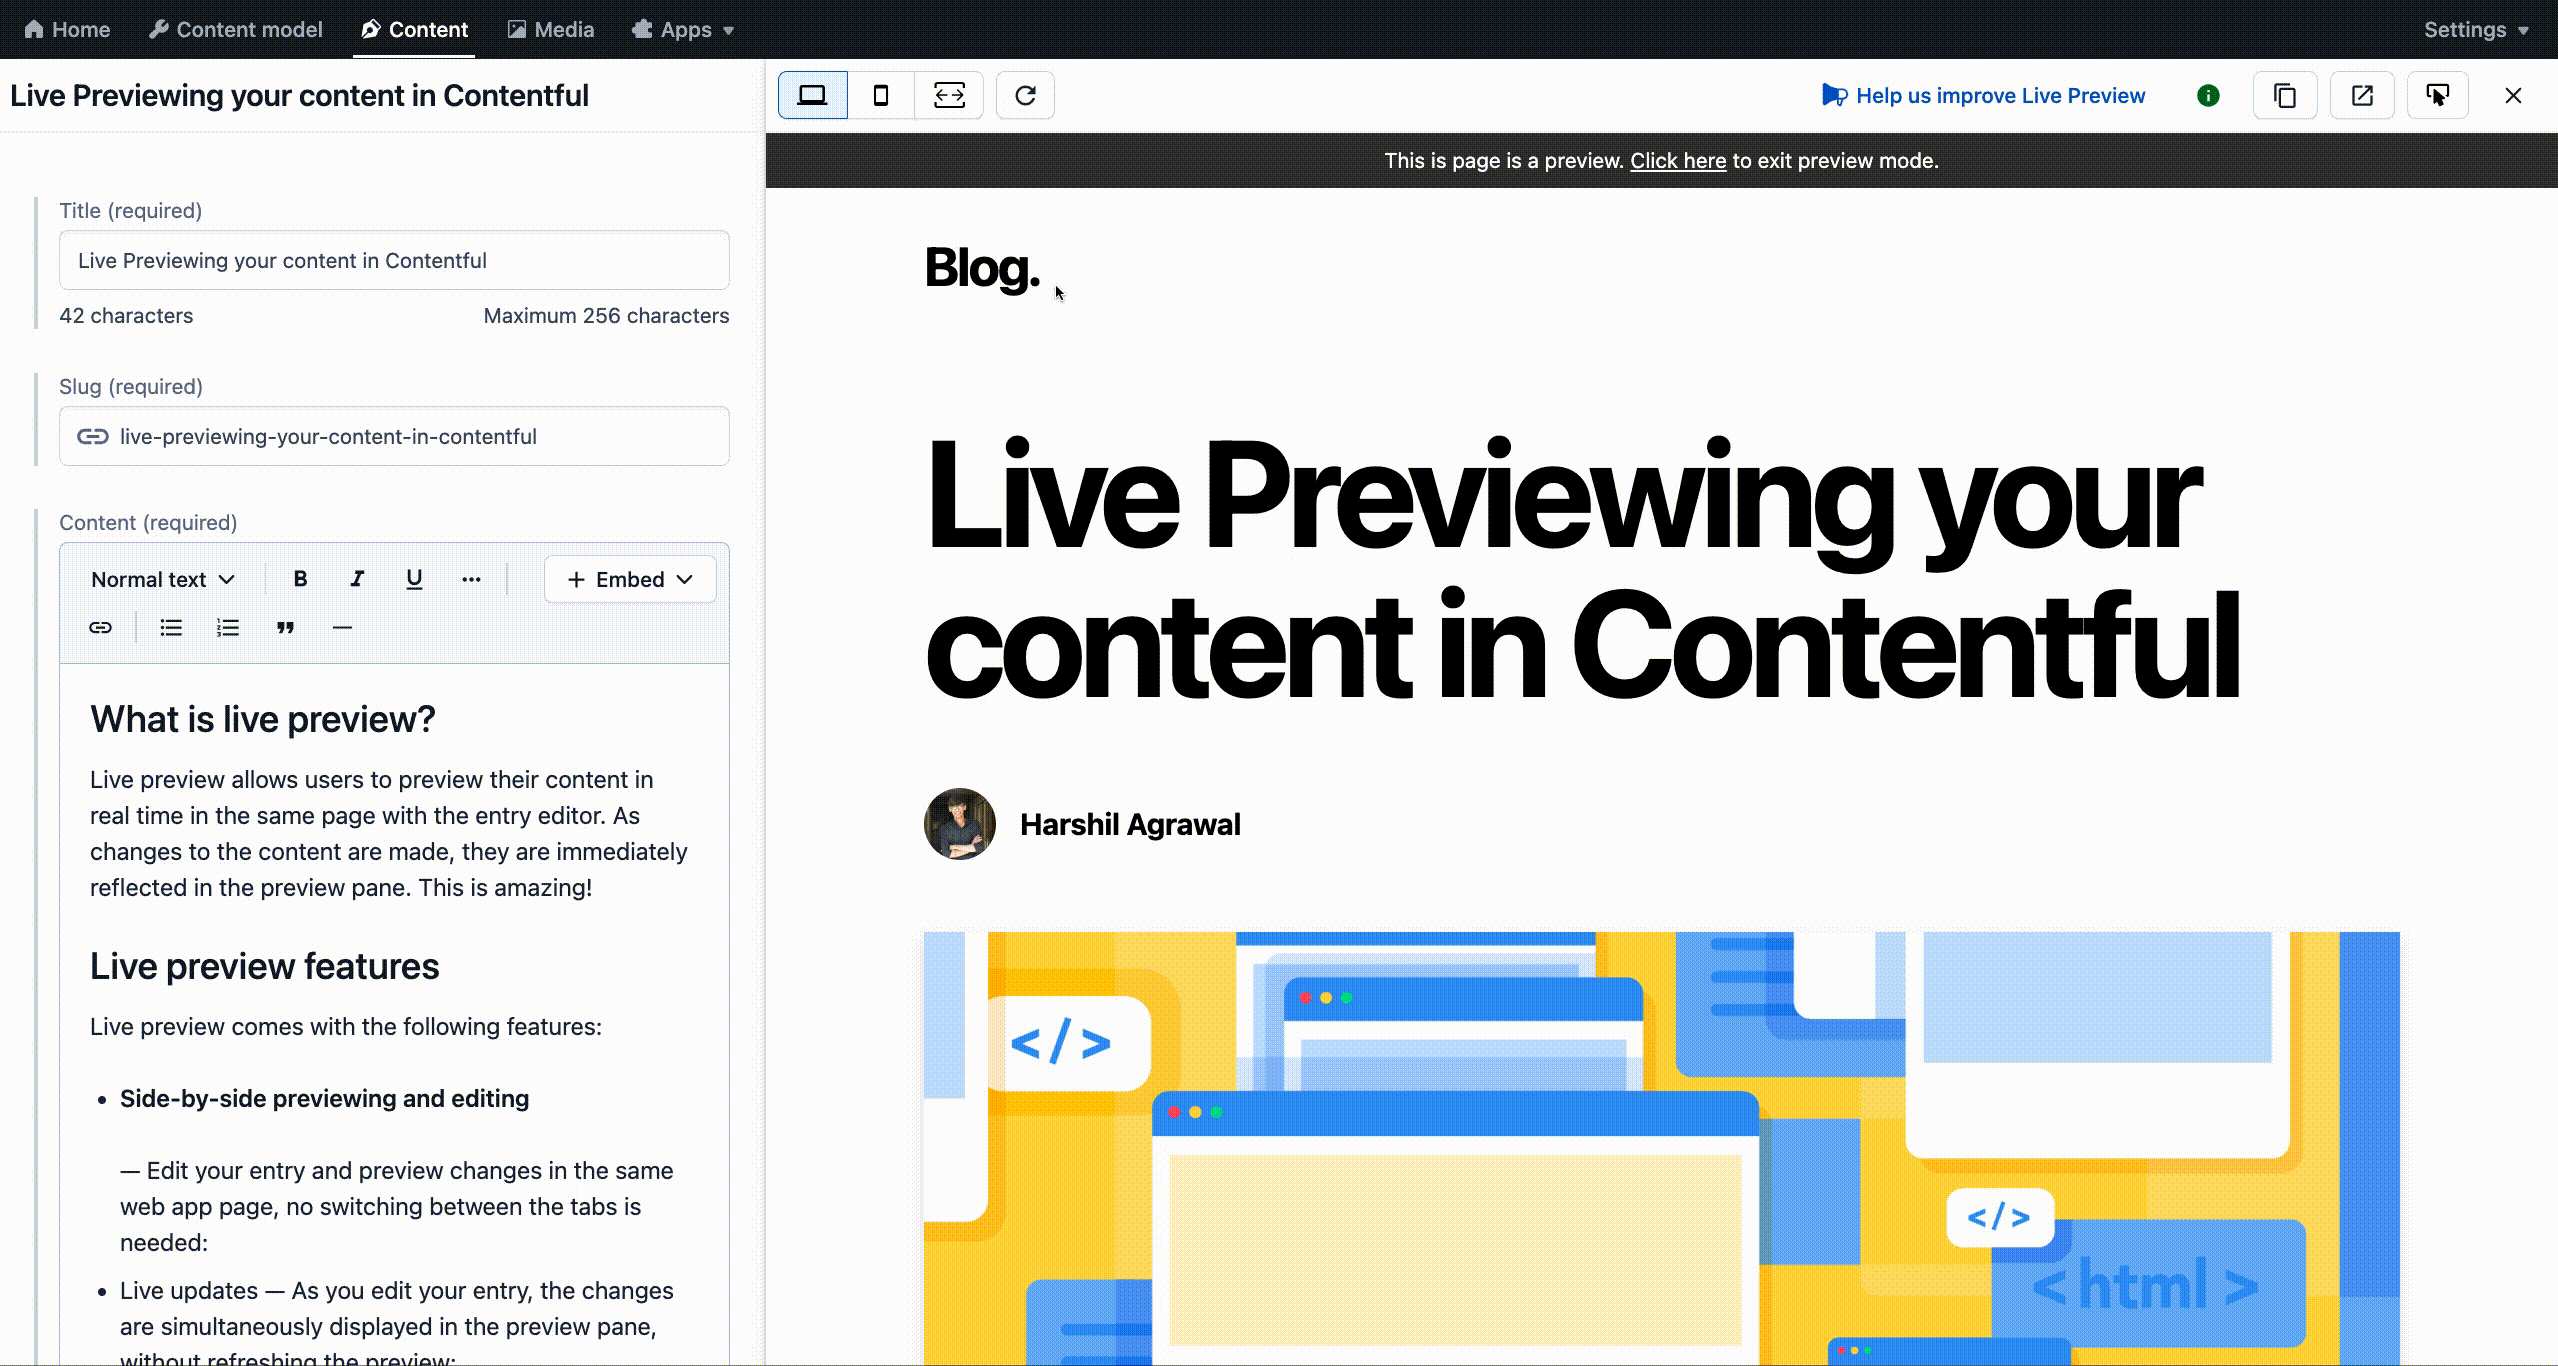 Animation showing live preview in action in Contentful.